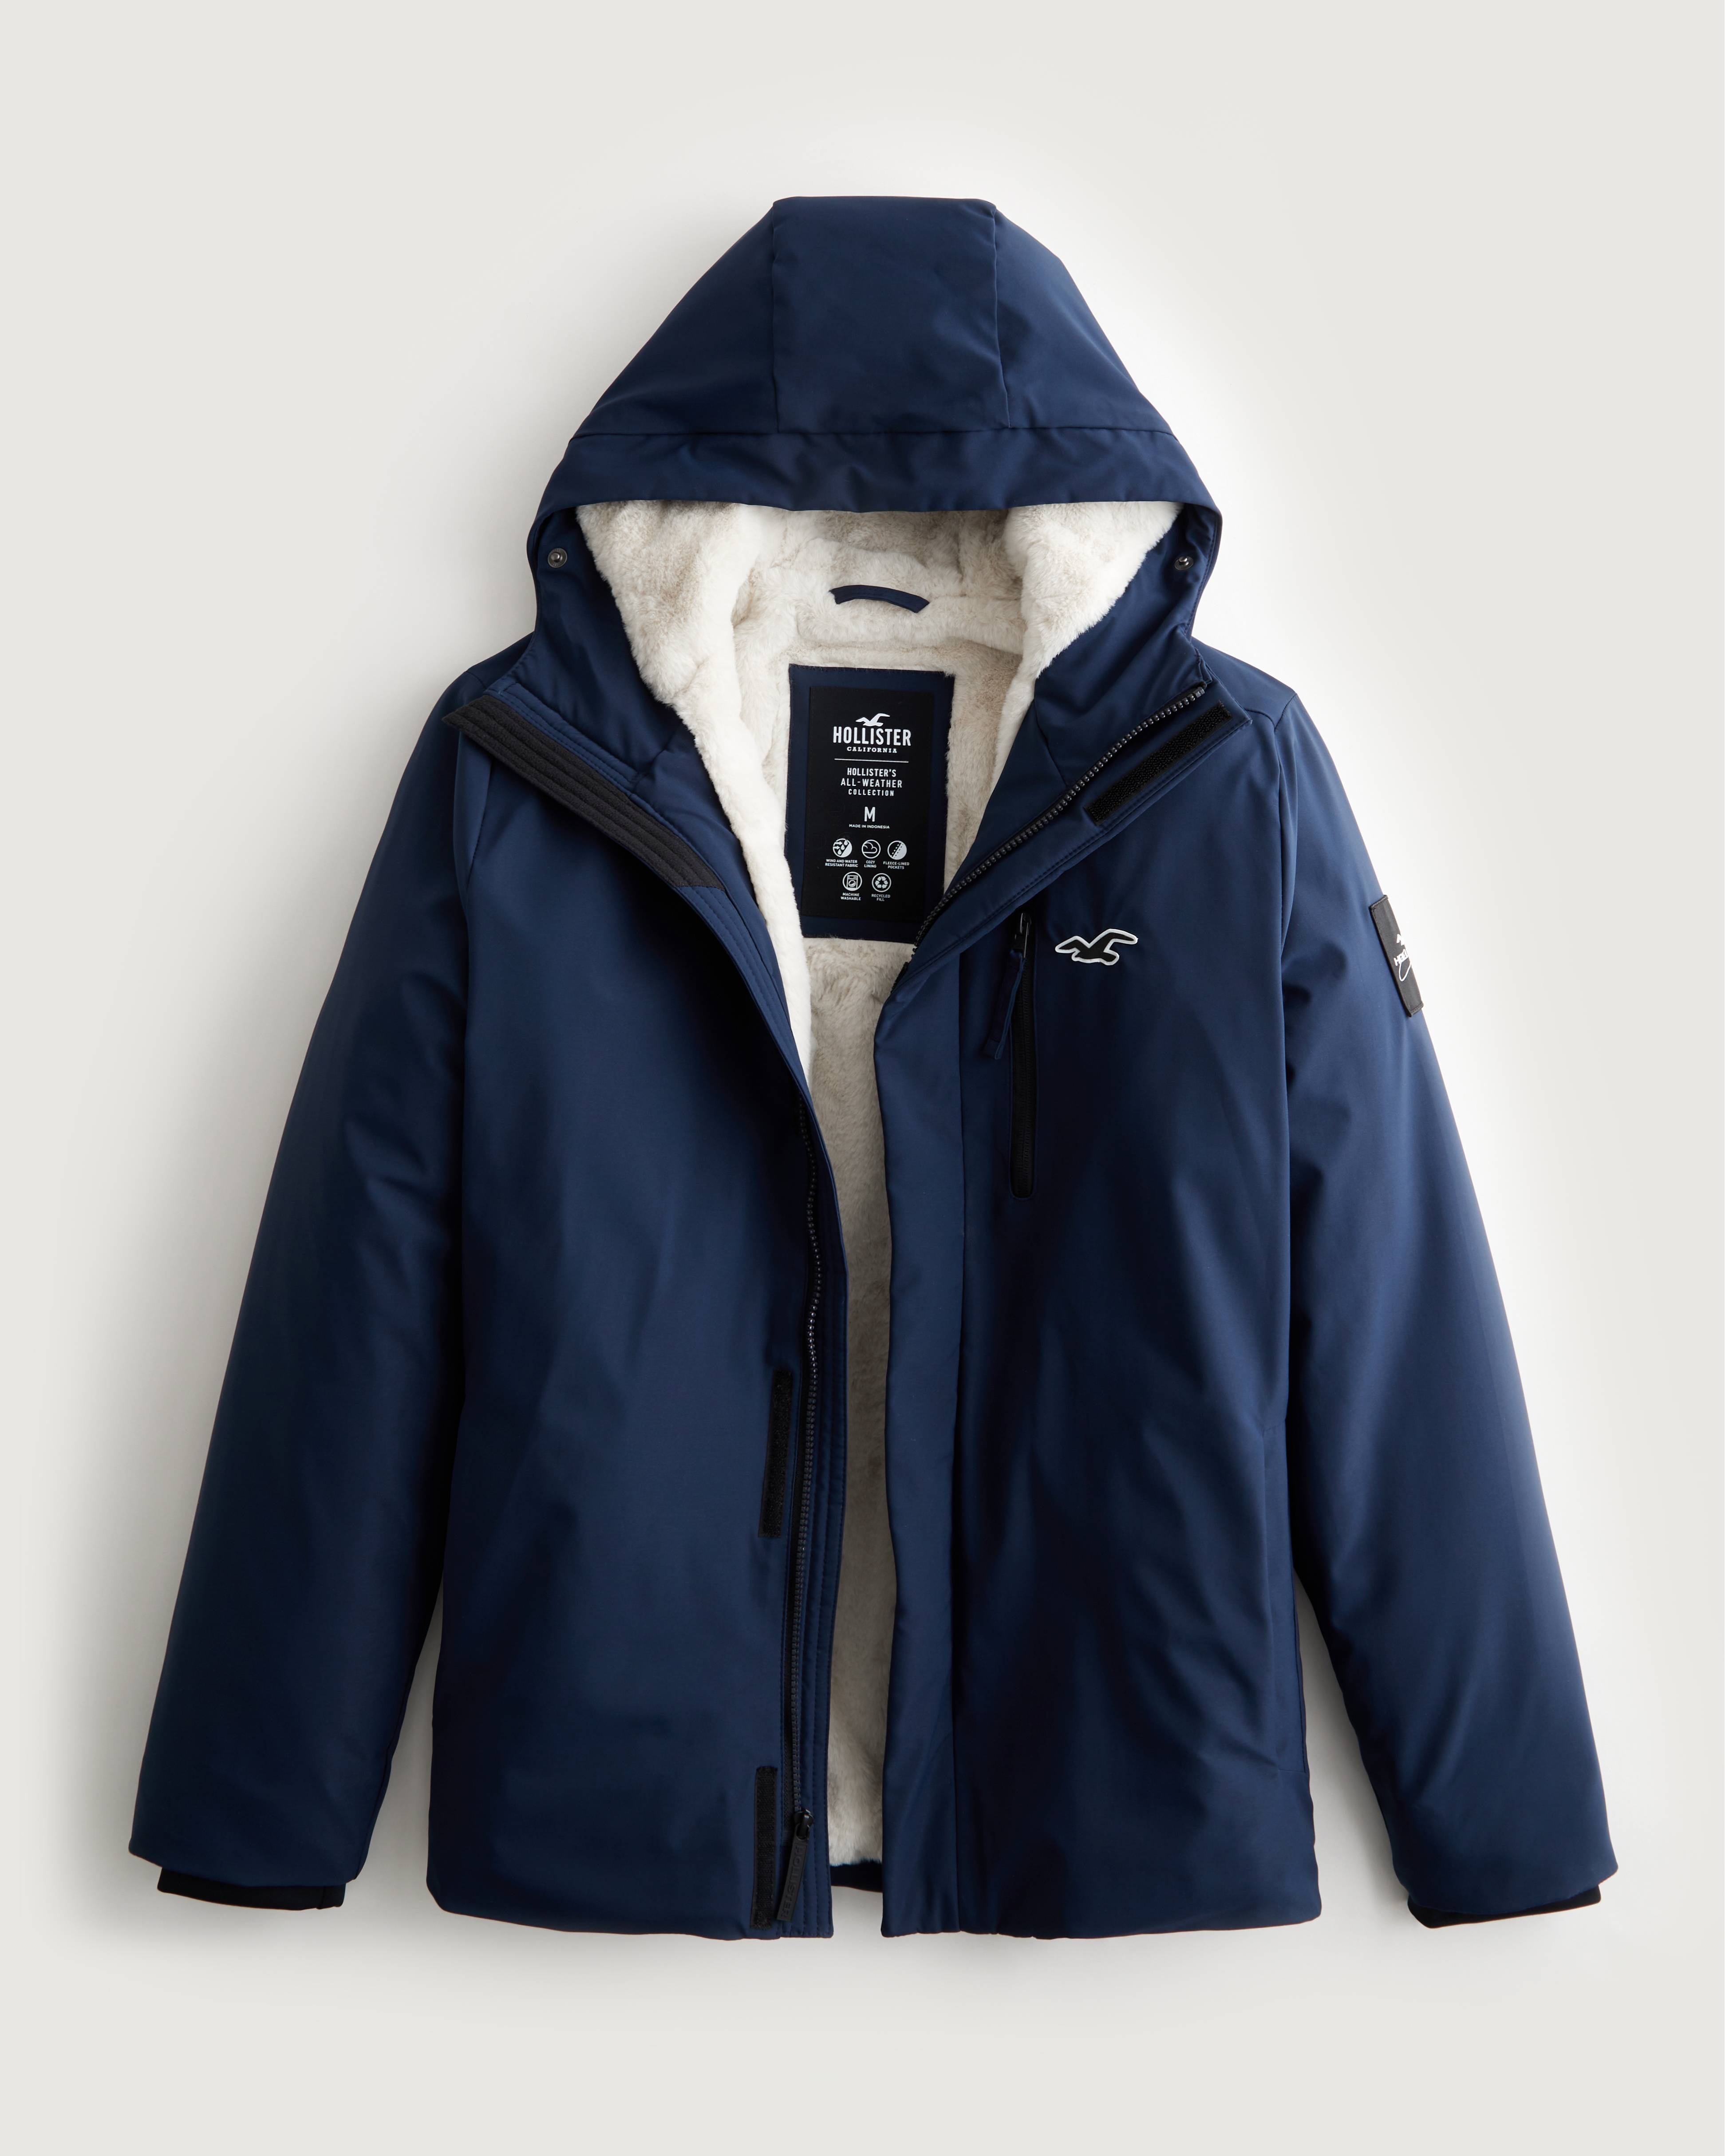 Hollister Faux Fur-Lined All-Weather Winter Jacket